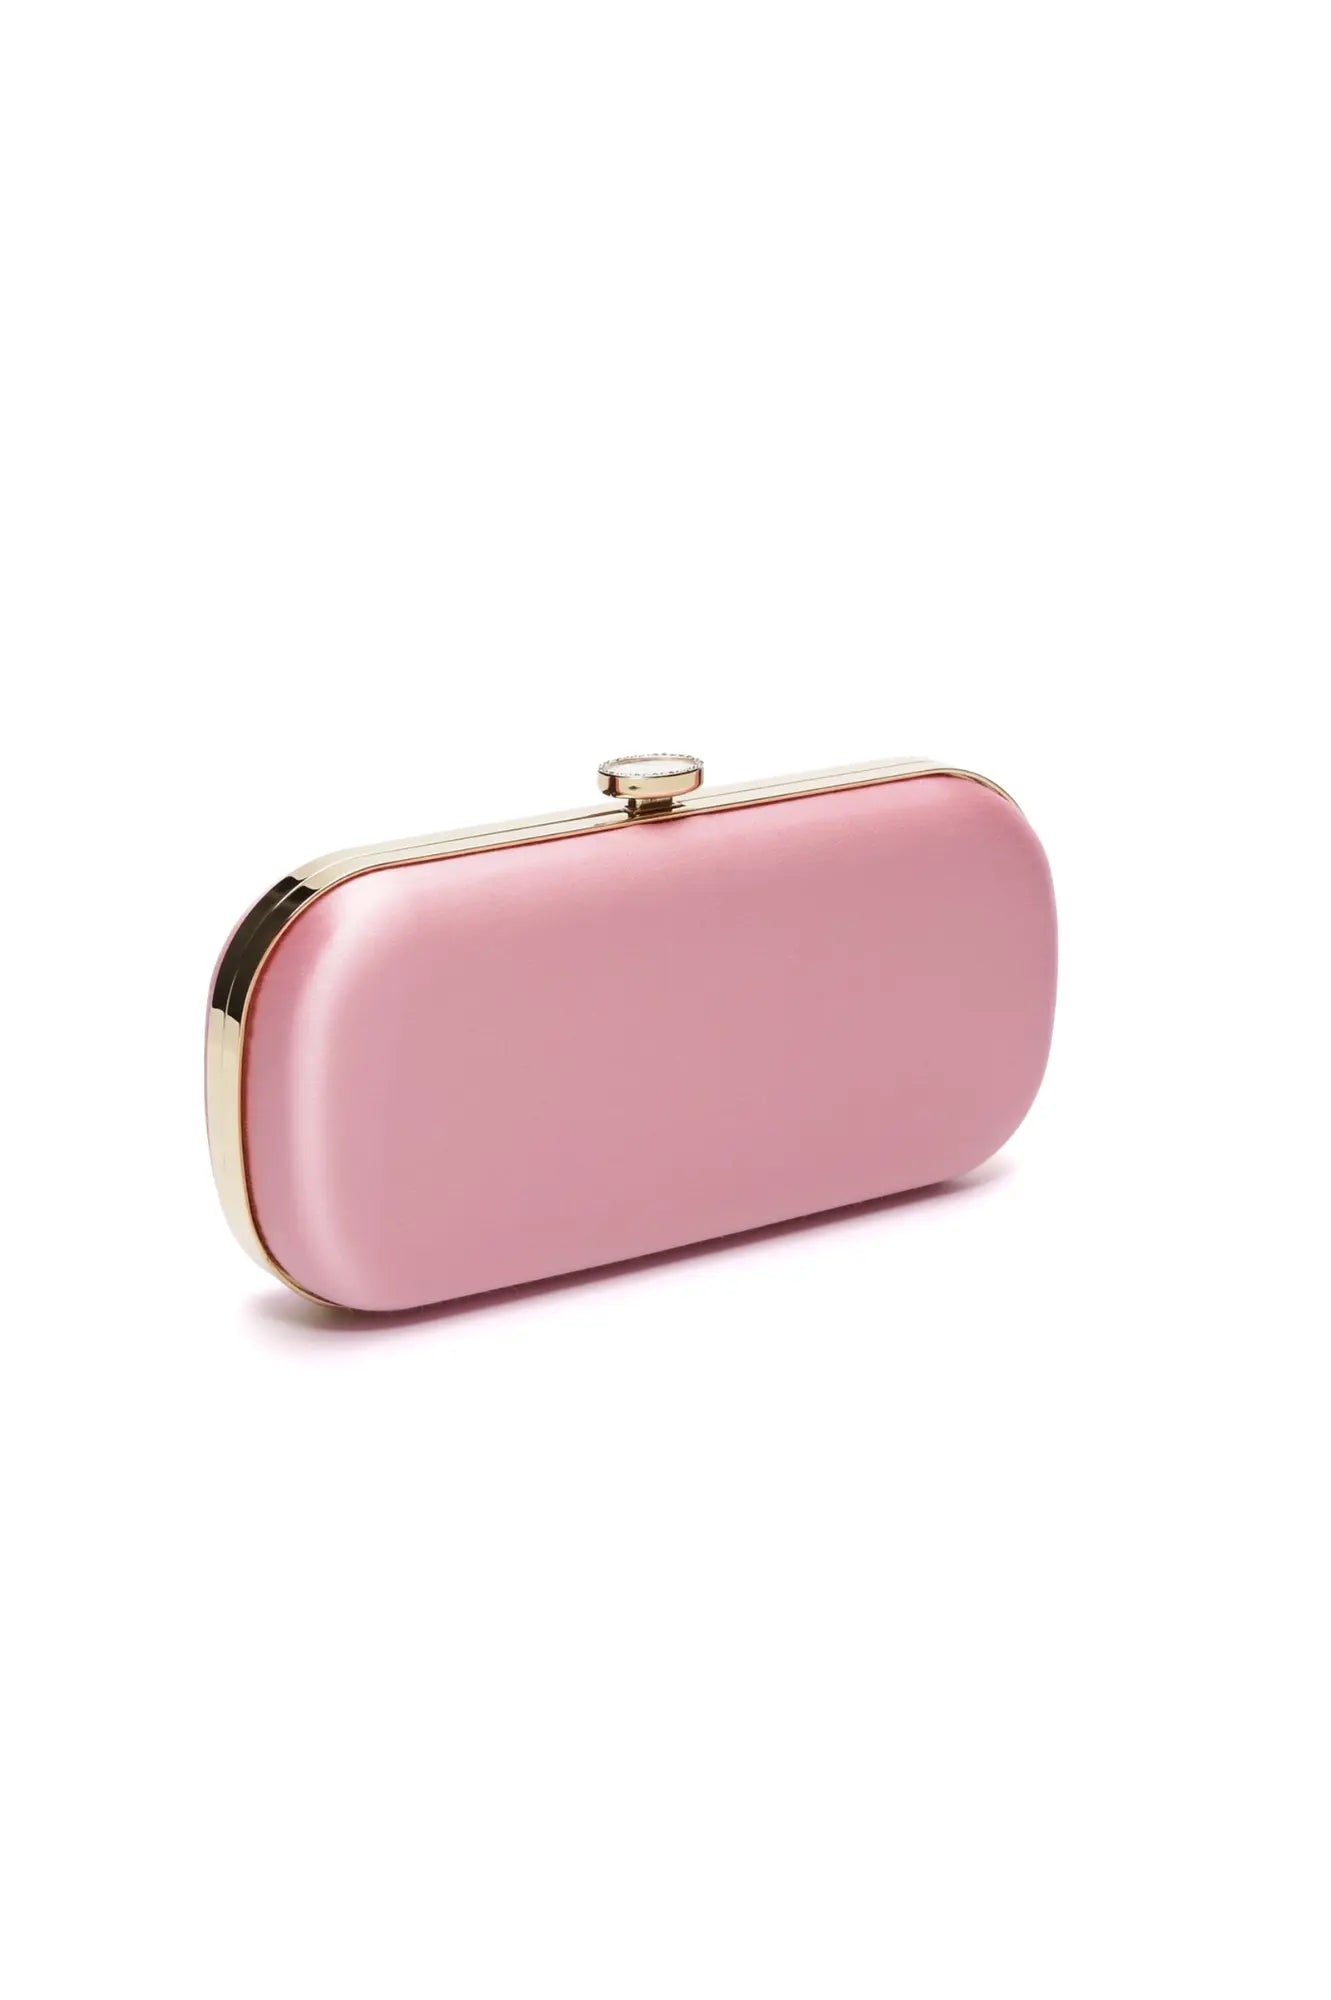 The Bella Rosa Collection's Bella Clutch Pink Grande with gold-tone hardware against a white background, perfected by Italian craftsmen.